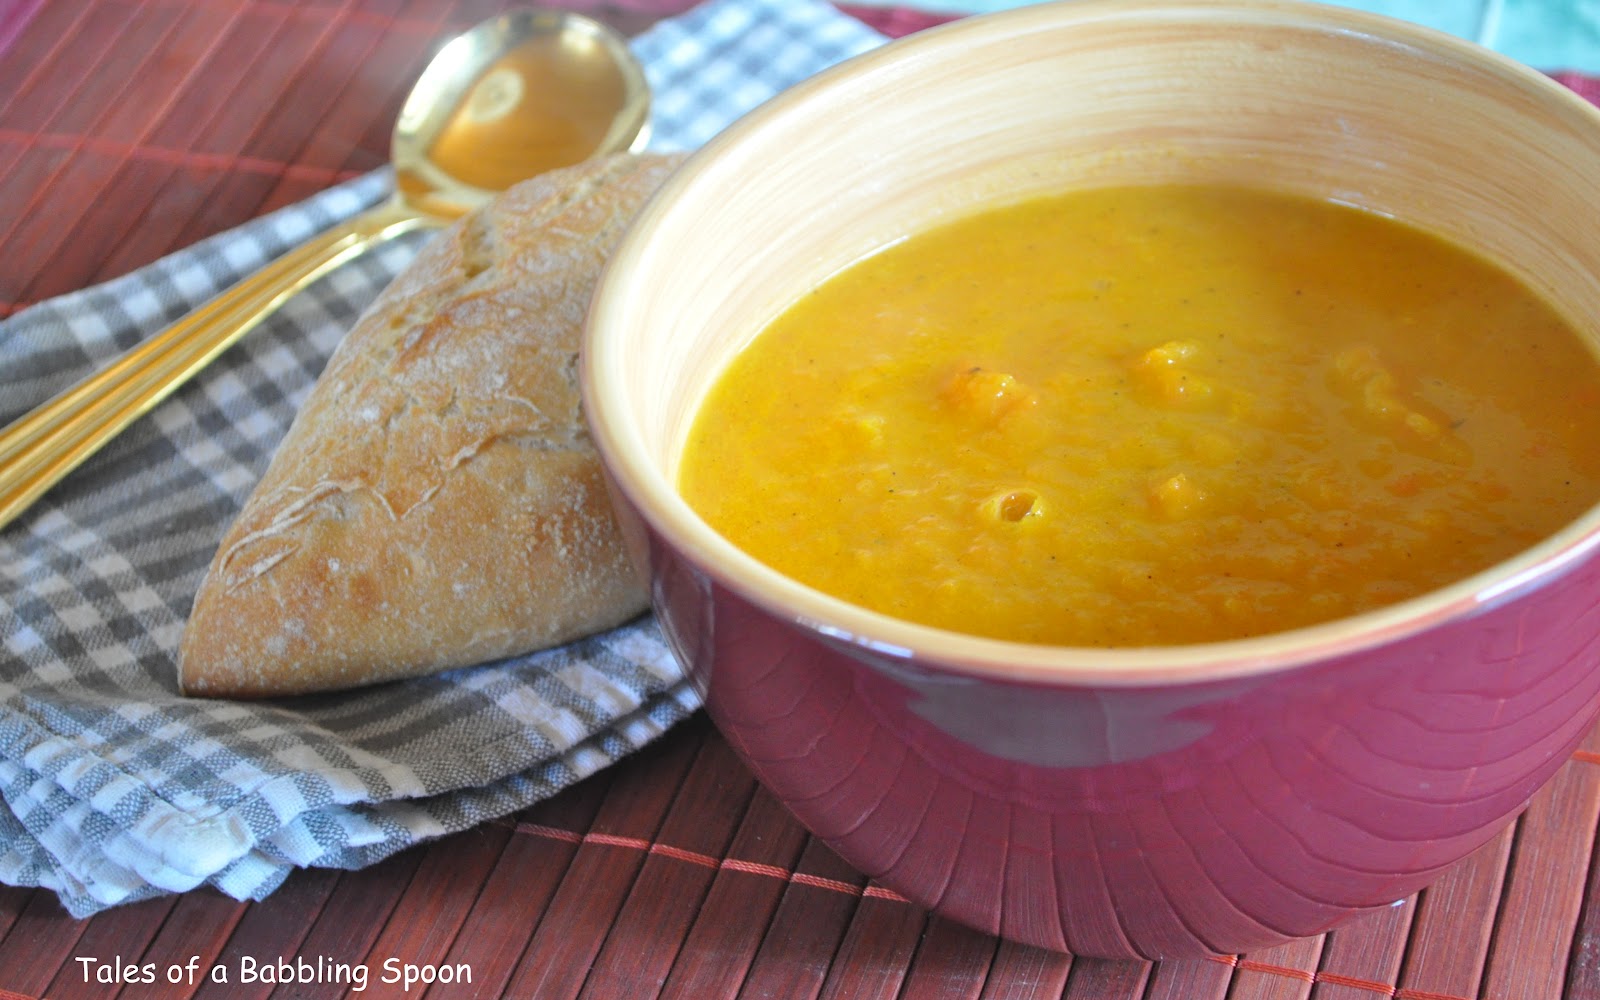 Tales of a Babbling Spoon: Sweet Potato and Fish Chowder